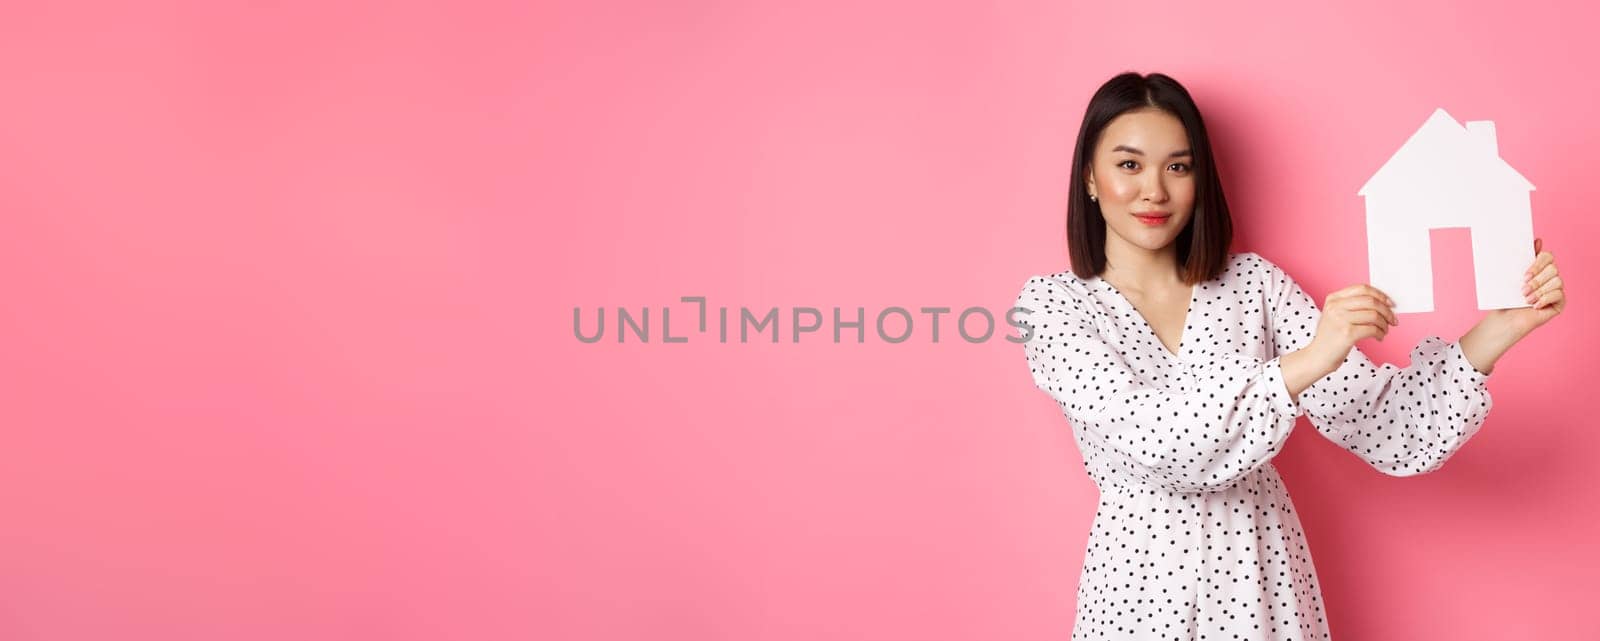 Real estate. Beautiful asian woman demonstrating paper house model, looking at camera confident, advertising home for sale, standing over pink background.